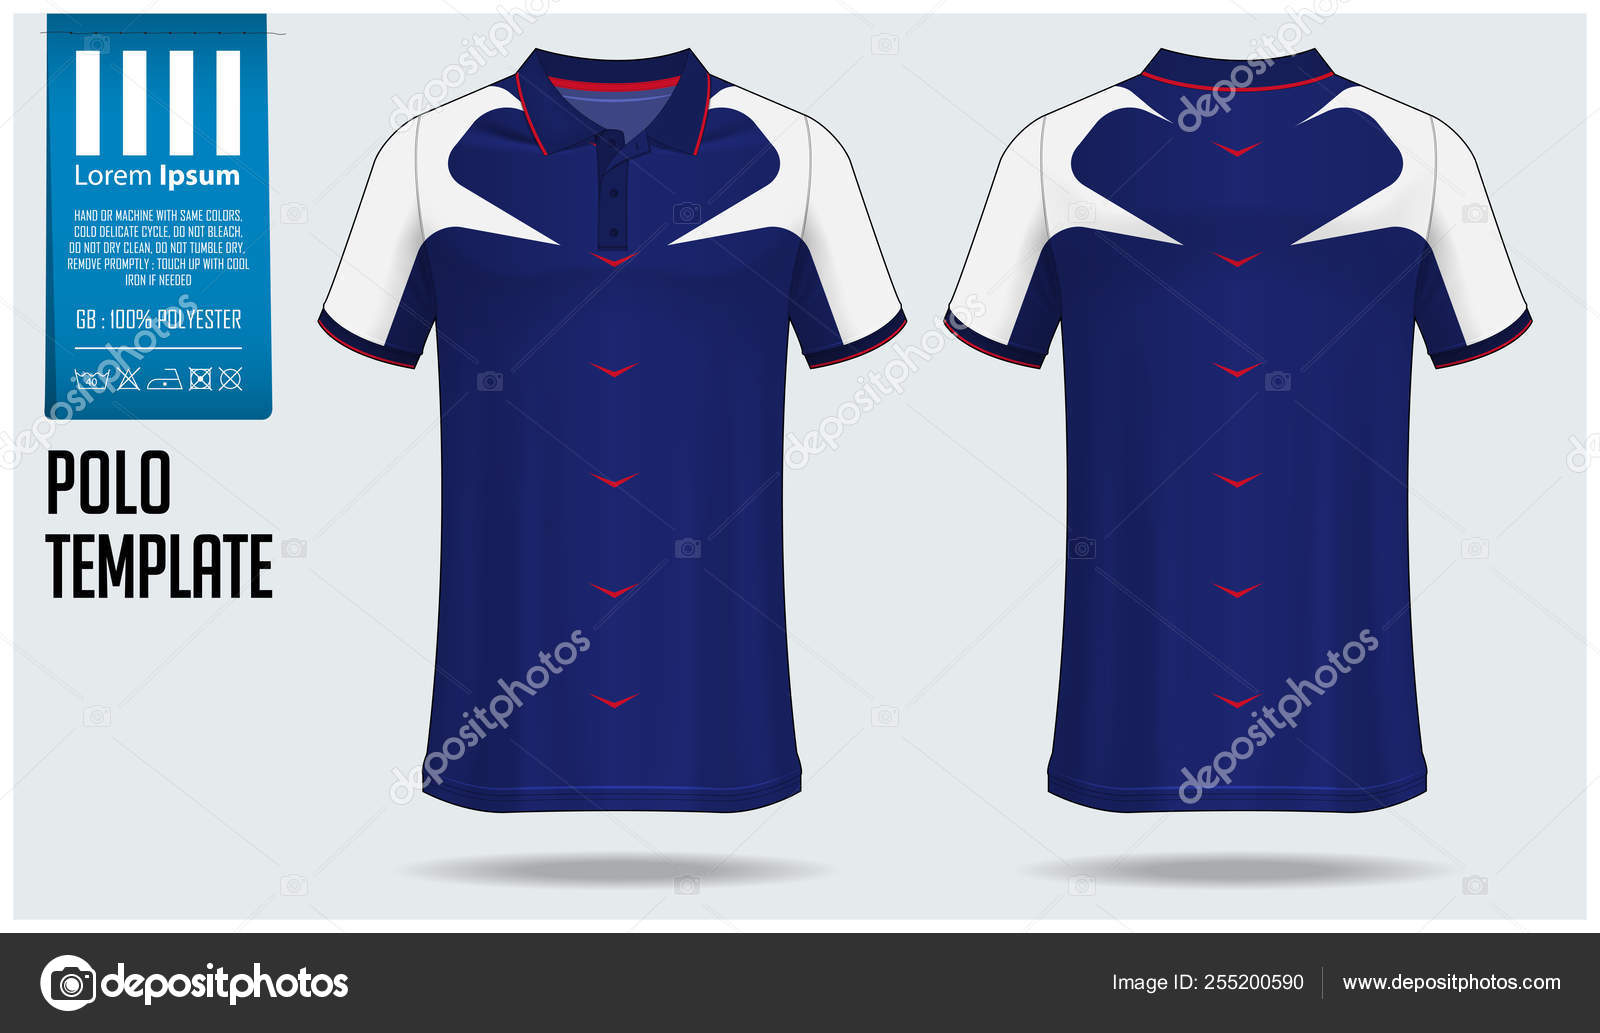 Cool Pattern Soccer jersey and t-shirt sport mockup template